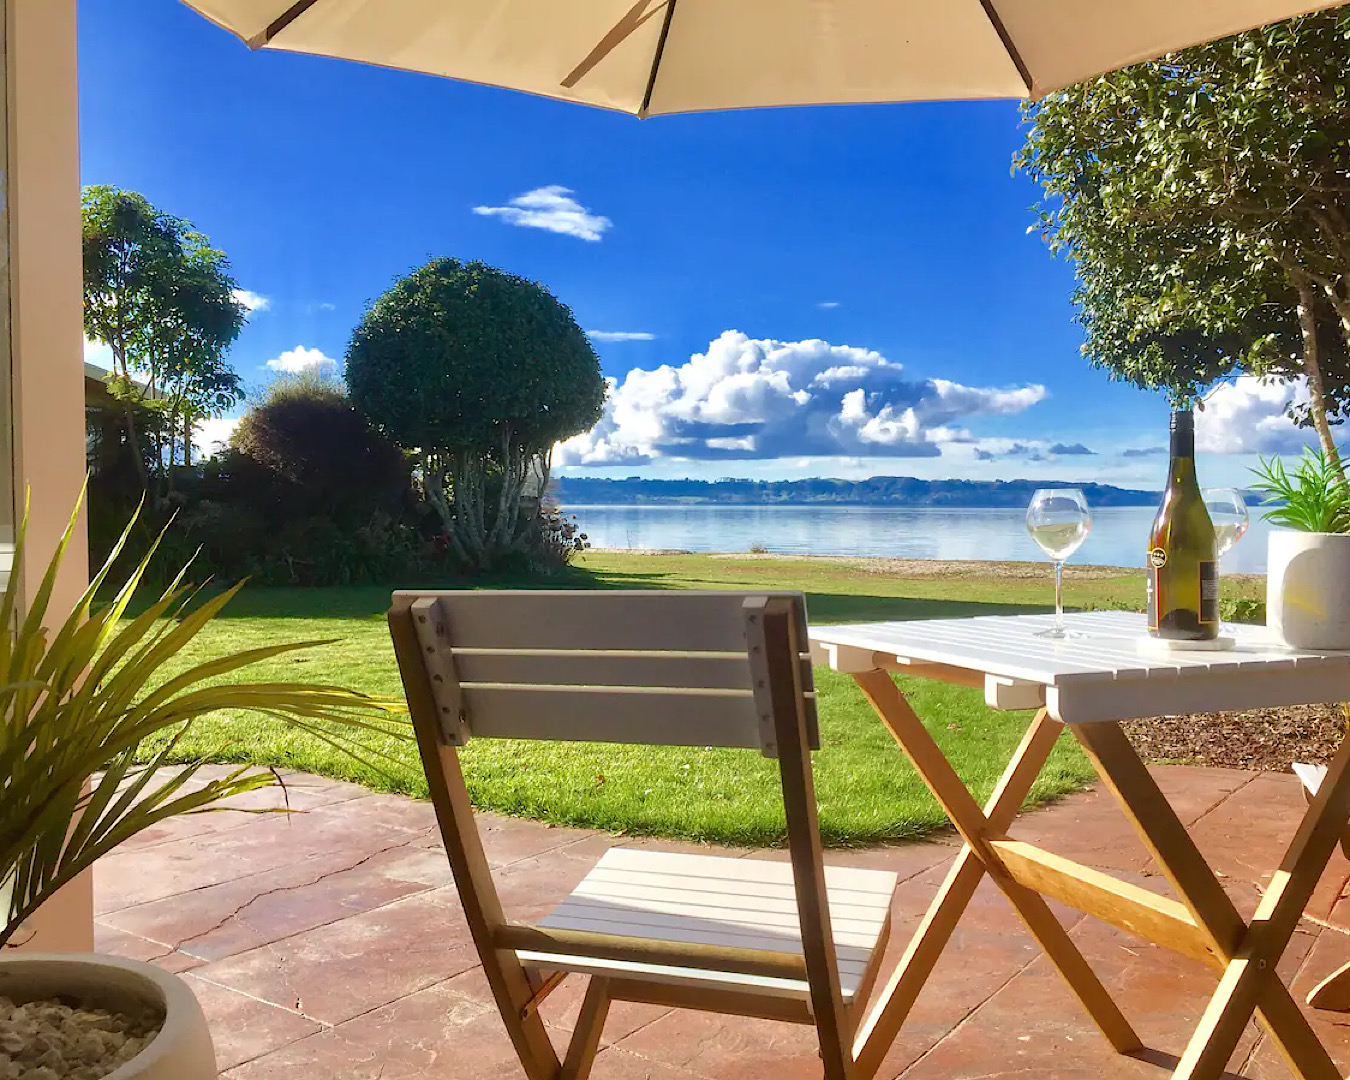 Blue skies, a lake view and two glasses of wine from a cute deck set up at Rotorua Airbnb, Parawai Bay Lakeside Retreat. 